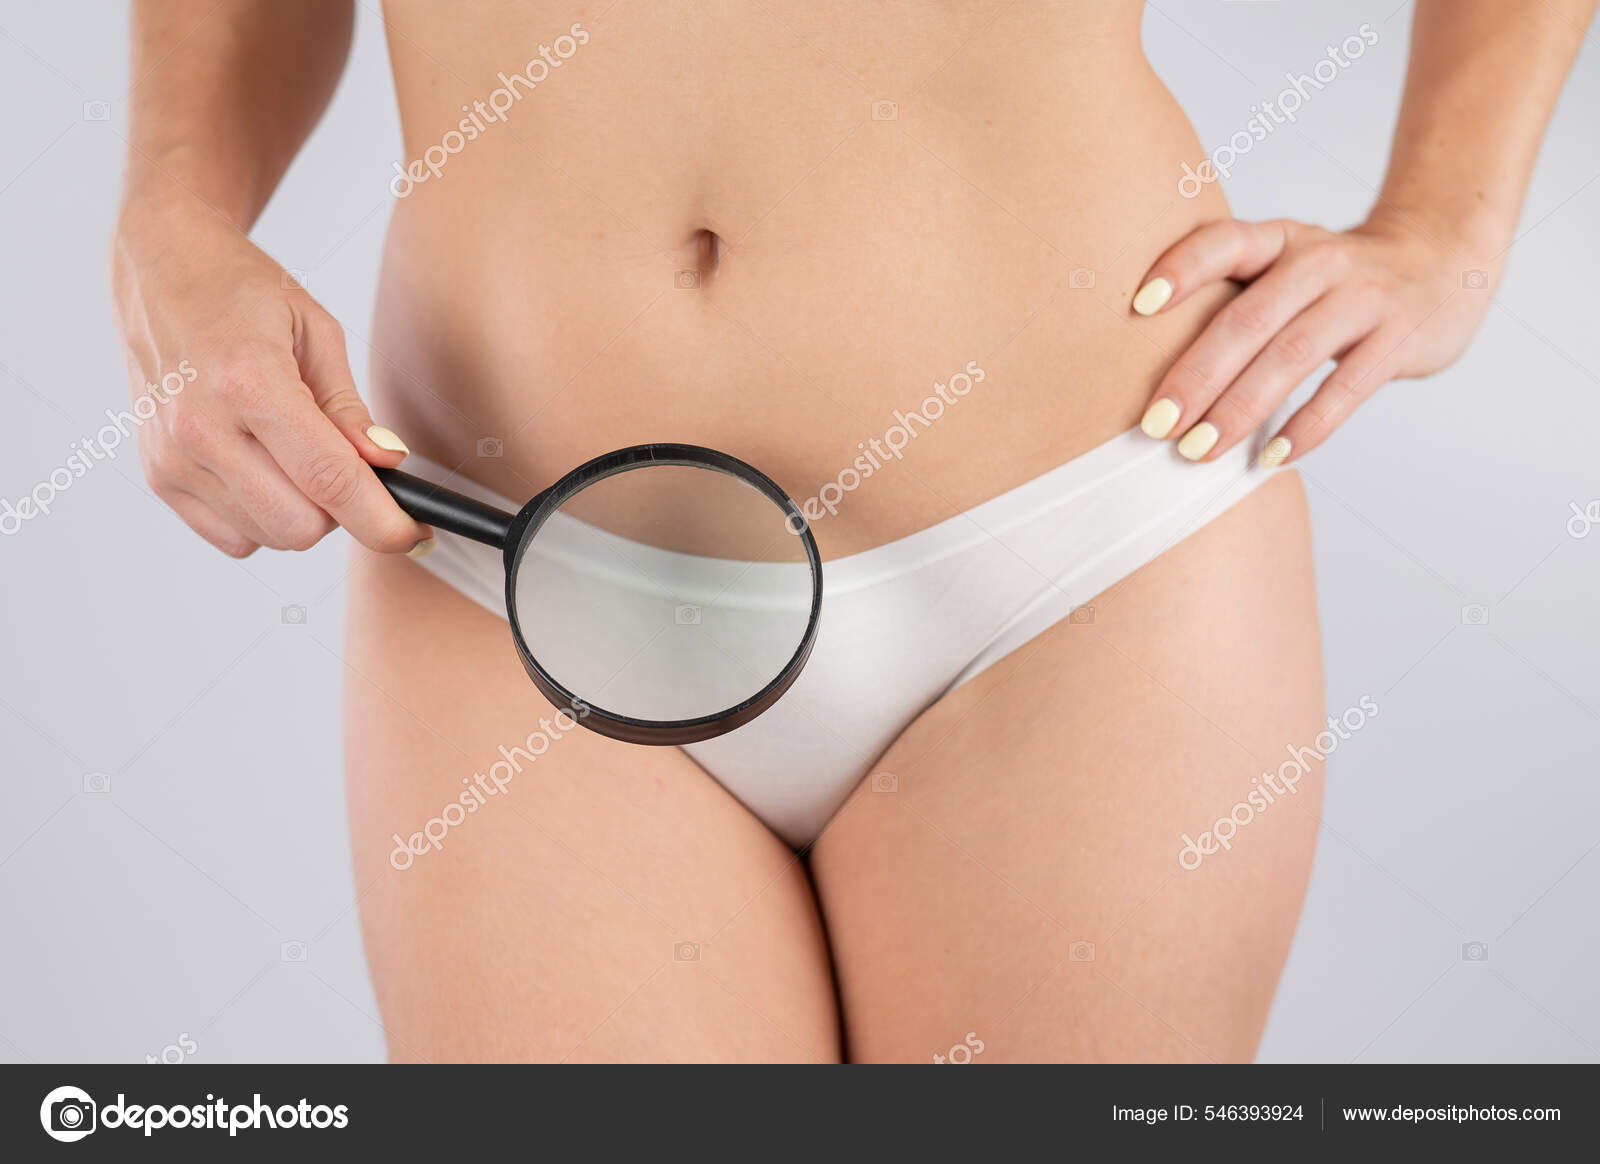 A woman in white shorts holds a magnifying glass on a white